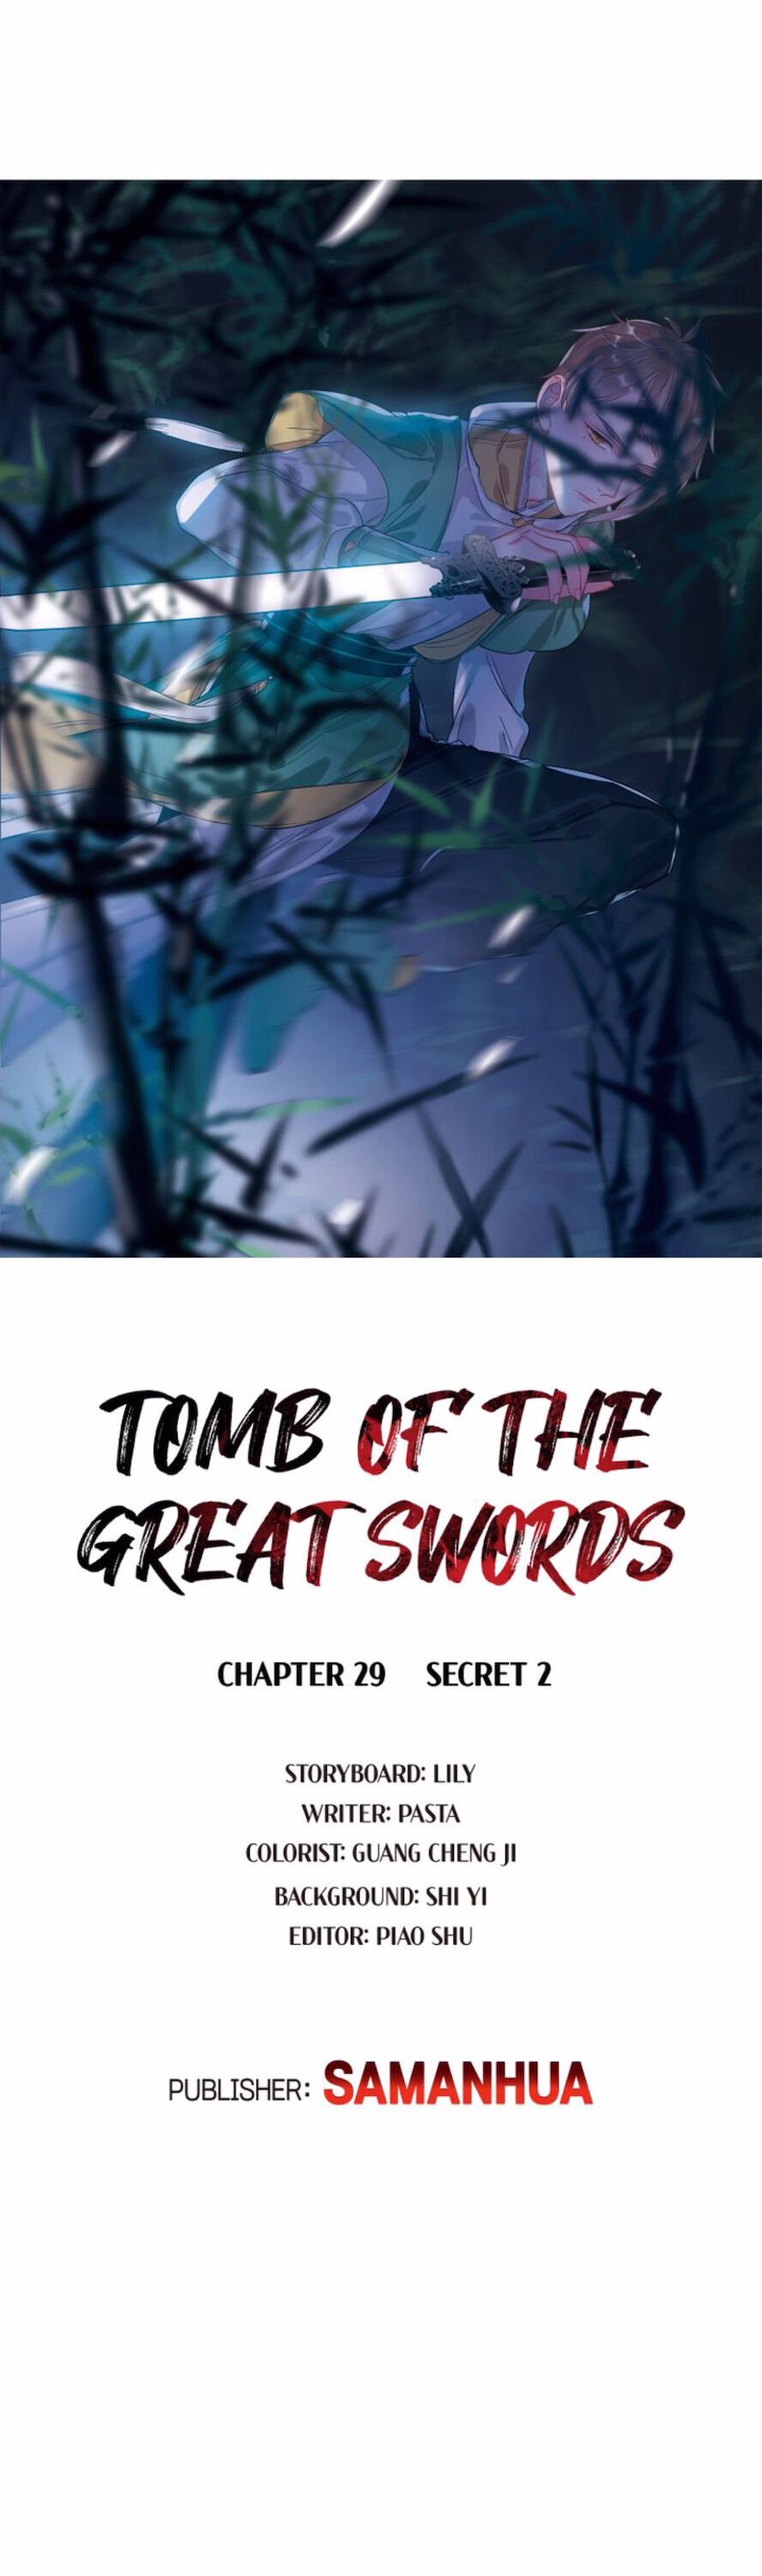 The Tomb of Famed Swords chapter 29